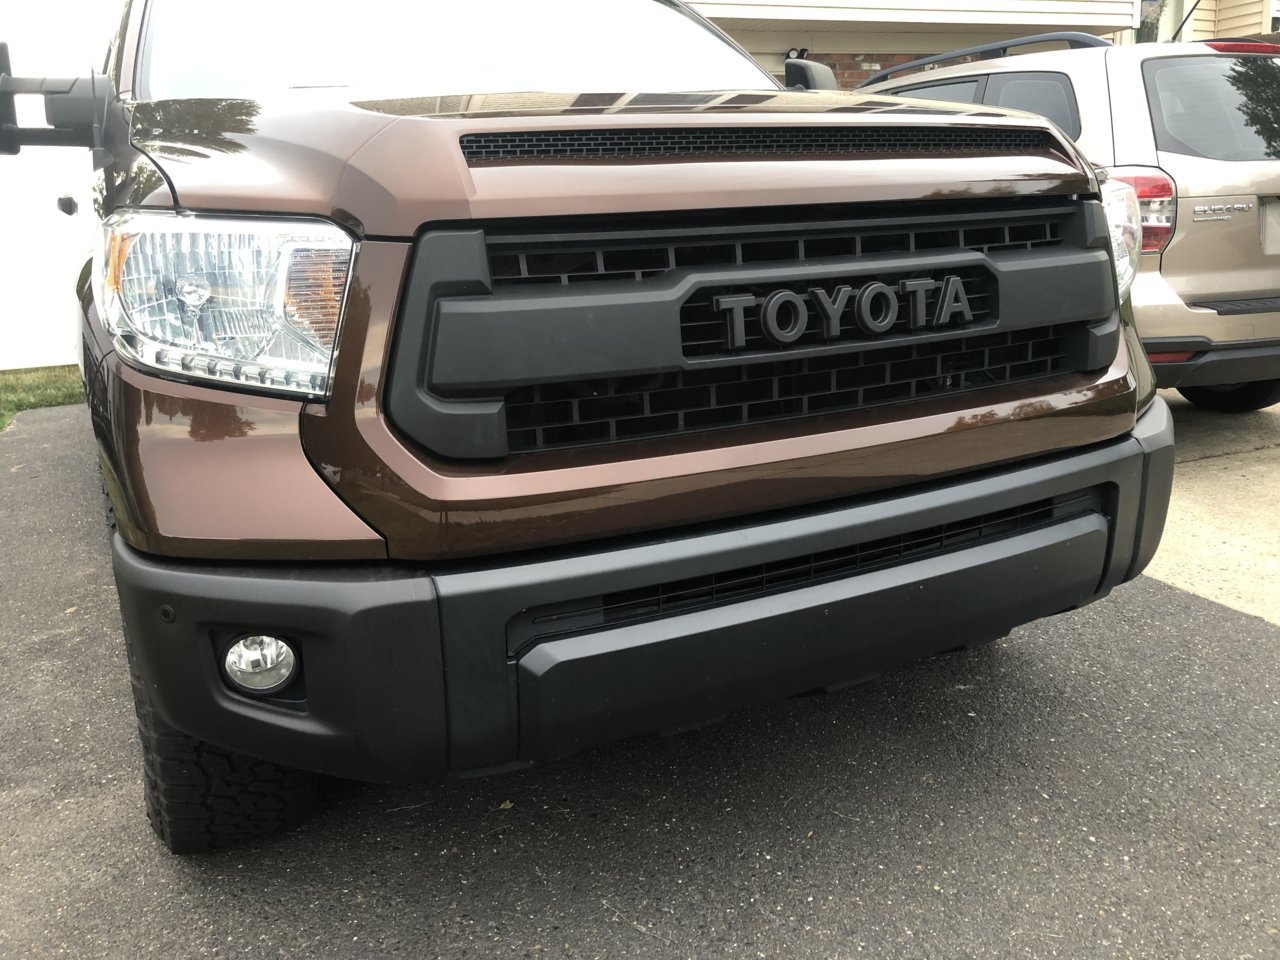 SR Bumper Covers Installed Over Chrome | Toyota Tundra Forum